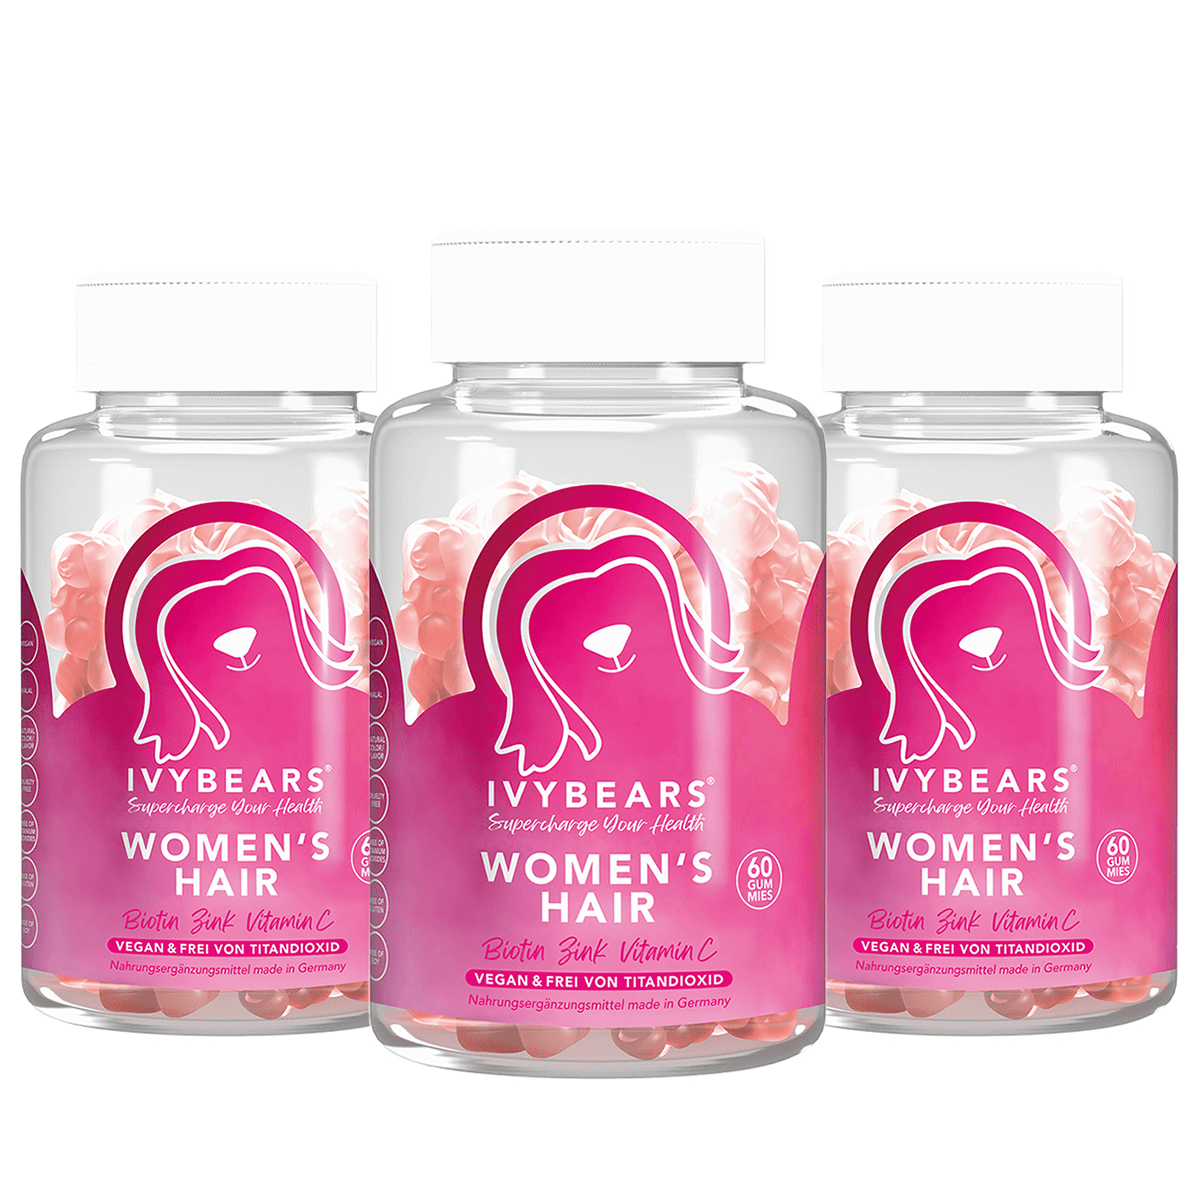 IVYBEARS - 3 month package hair vitamin for women - 450g